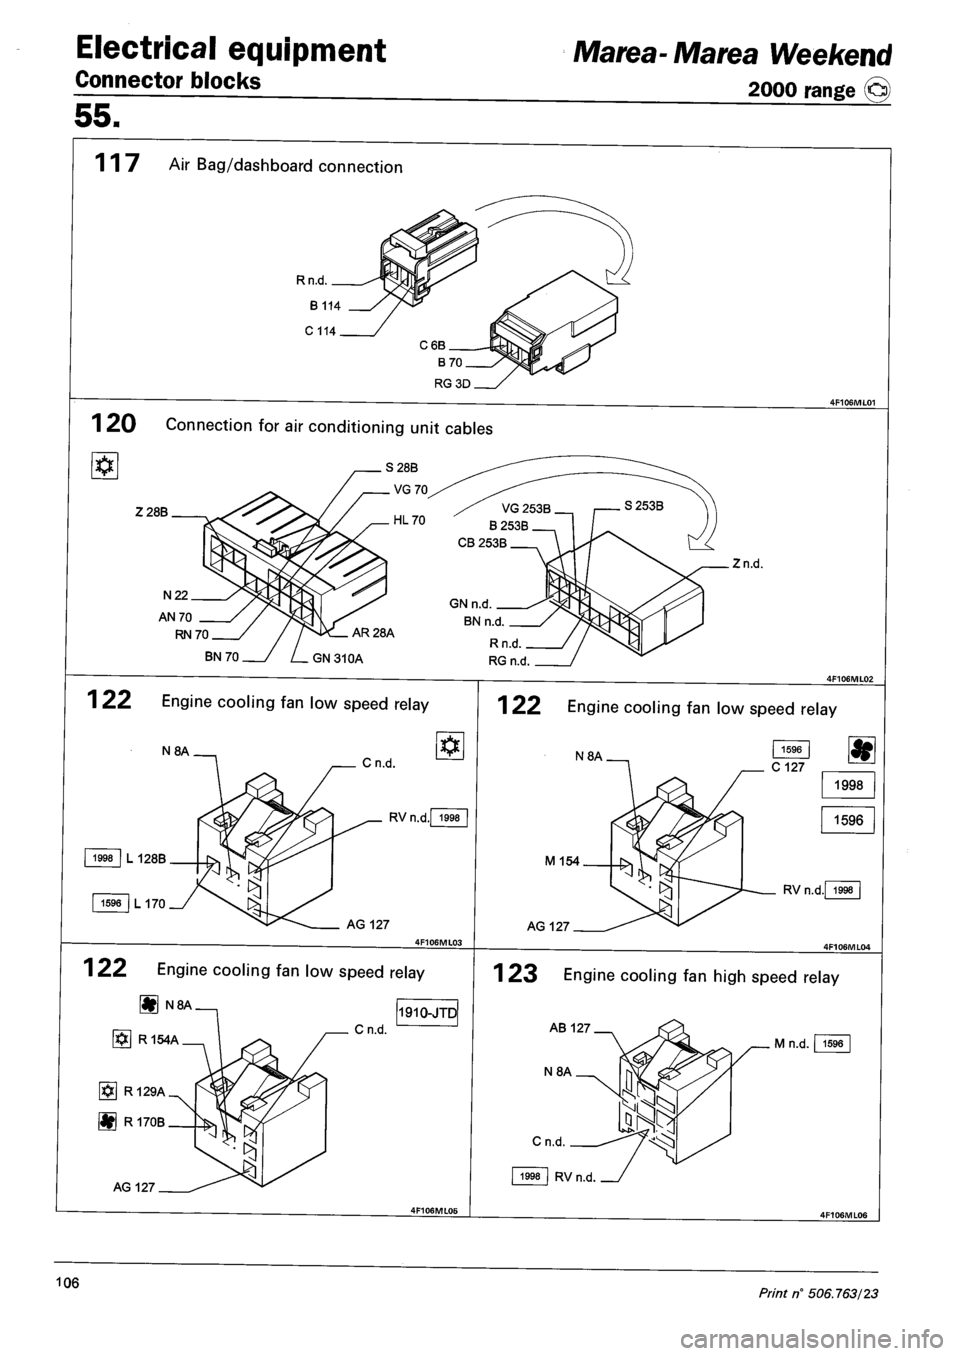 FIAT MAREA 2000 1.G Service Manual Electrical equipment 
Connector blocks 
Marea- Marea Weekend 
2000 range © 
55. 
117 Air Bag/dashboard connection 
Rn.d 
1 20 Connection for air conditioning unit cables 
Z28B 
Zn.d. 
N22 
AN 70 
RN 